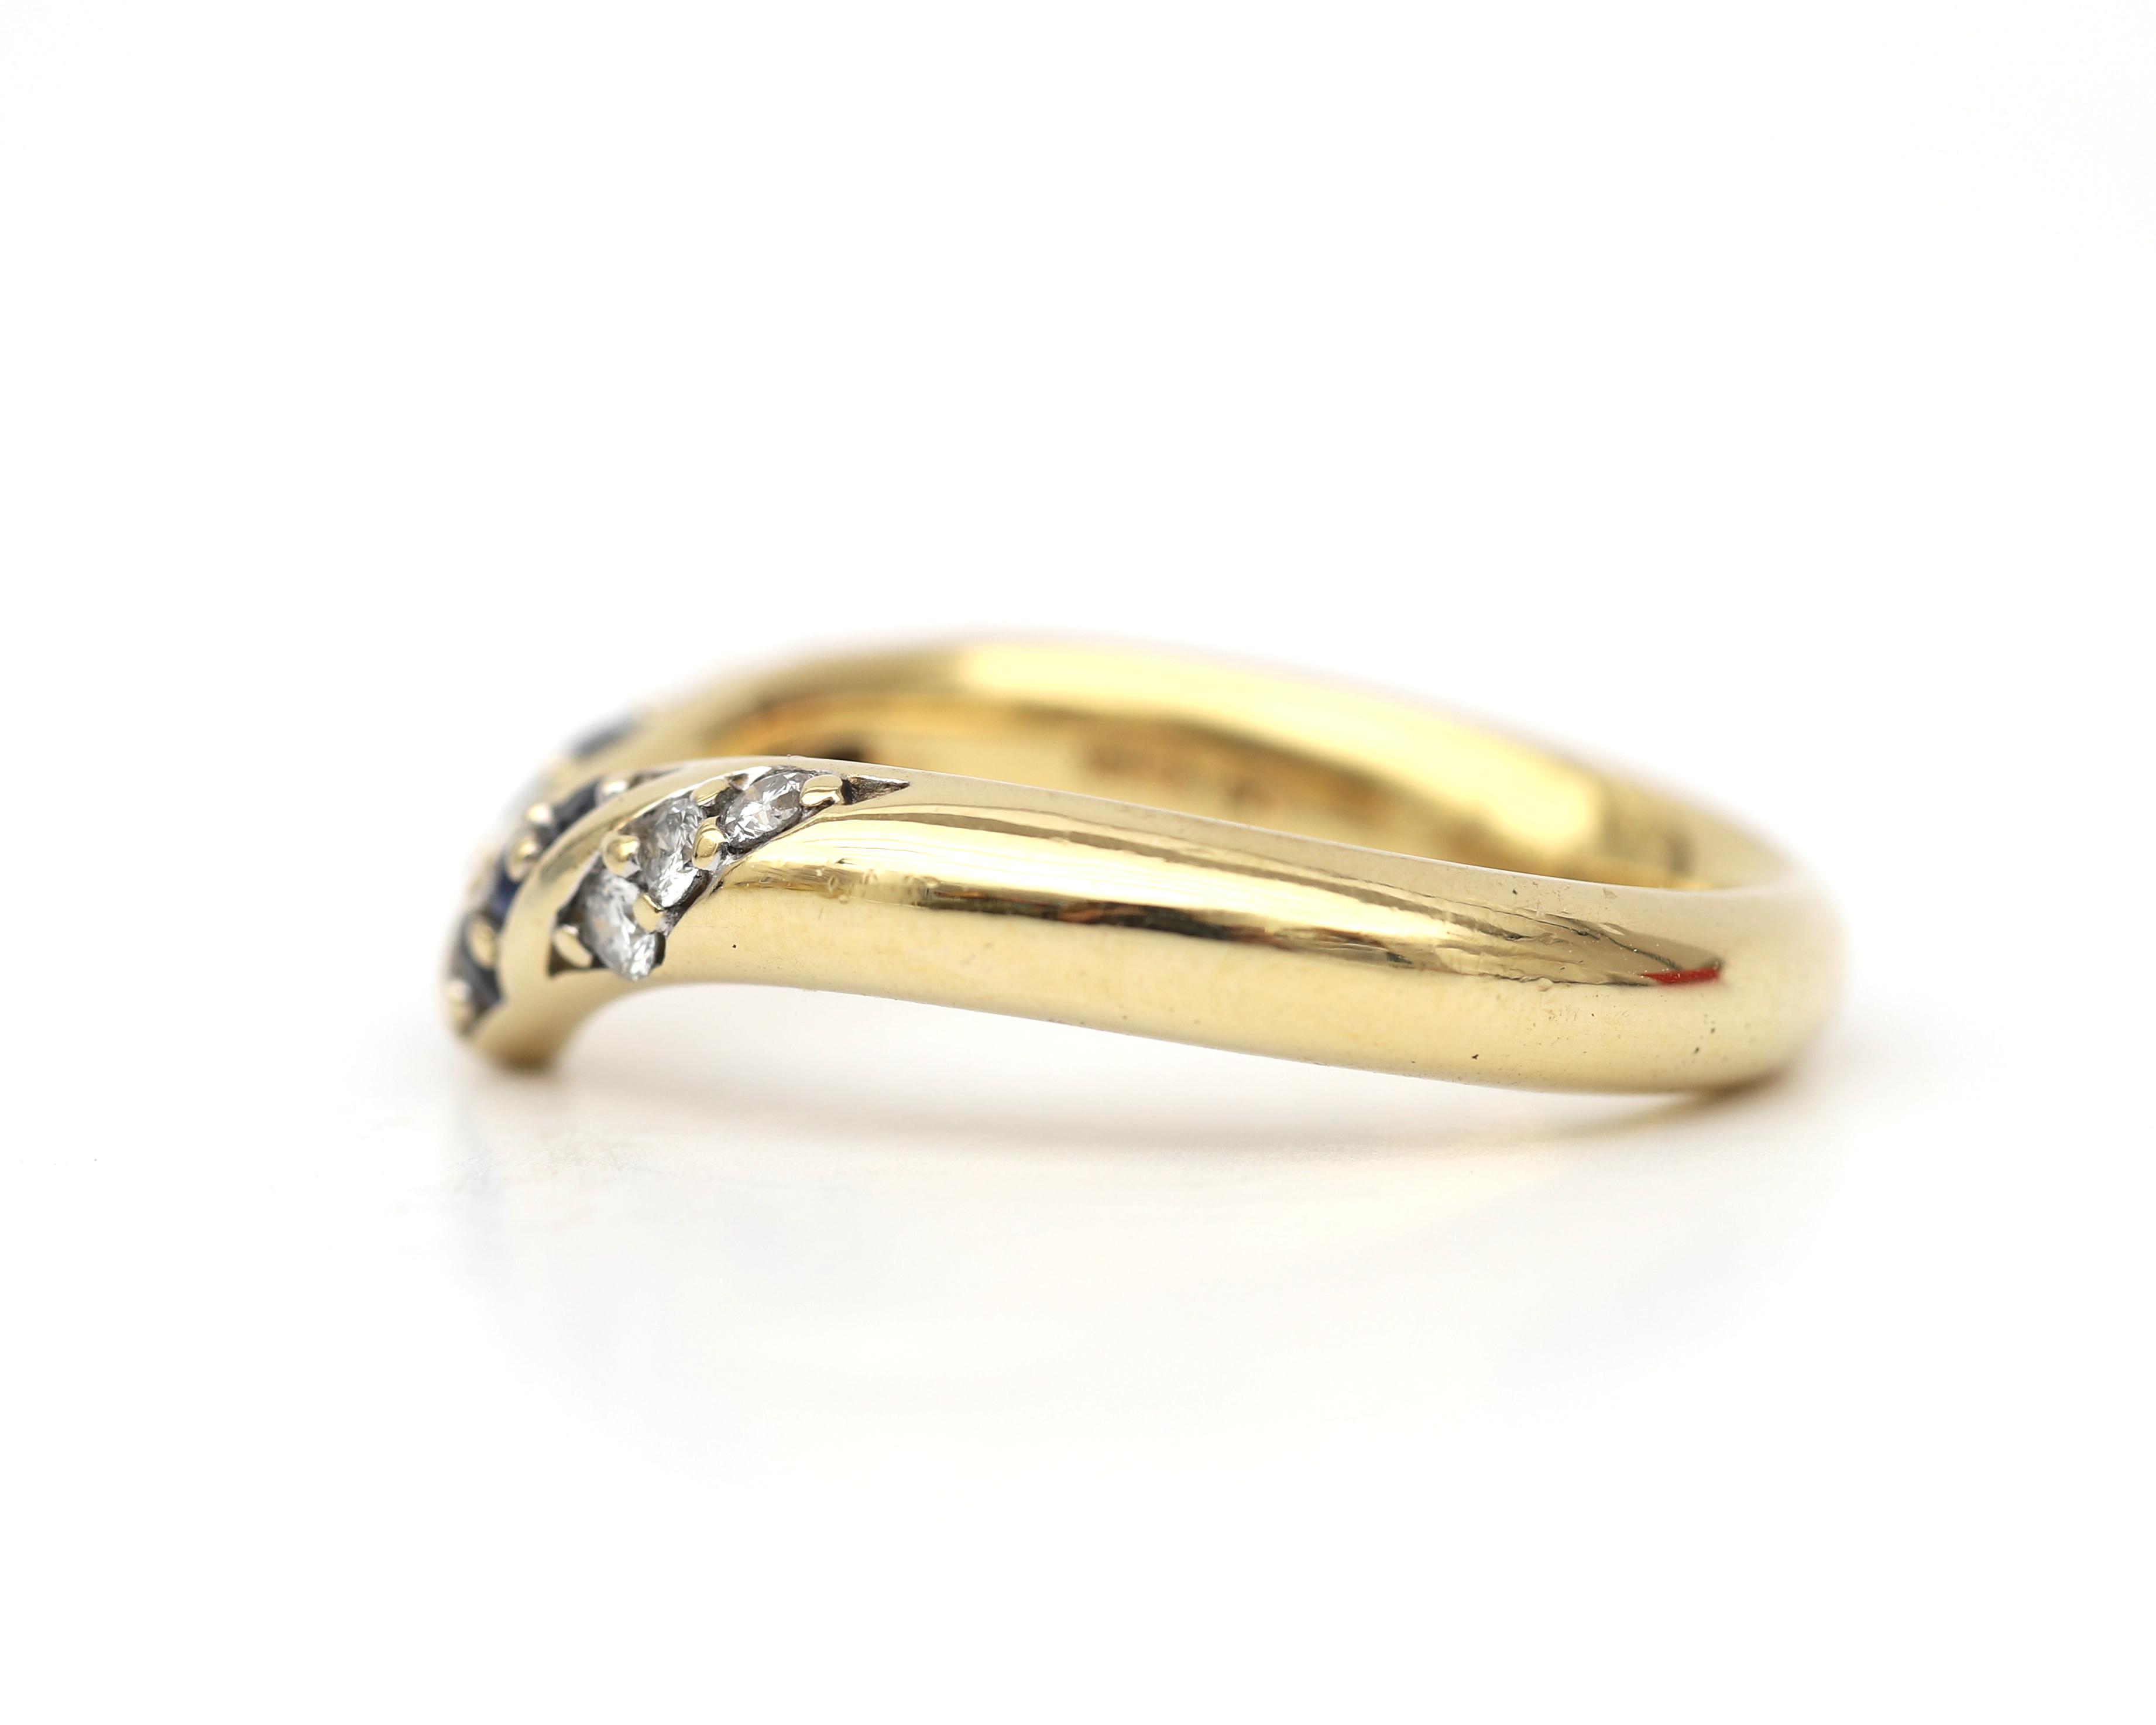 An 18 karat gold chevron ring, set with sapphires and diamonds - Image 3 of 5